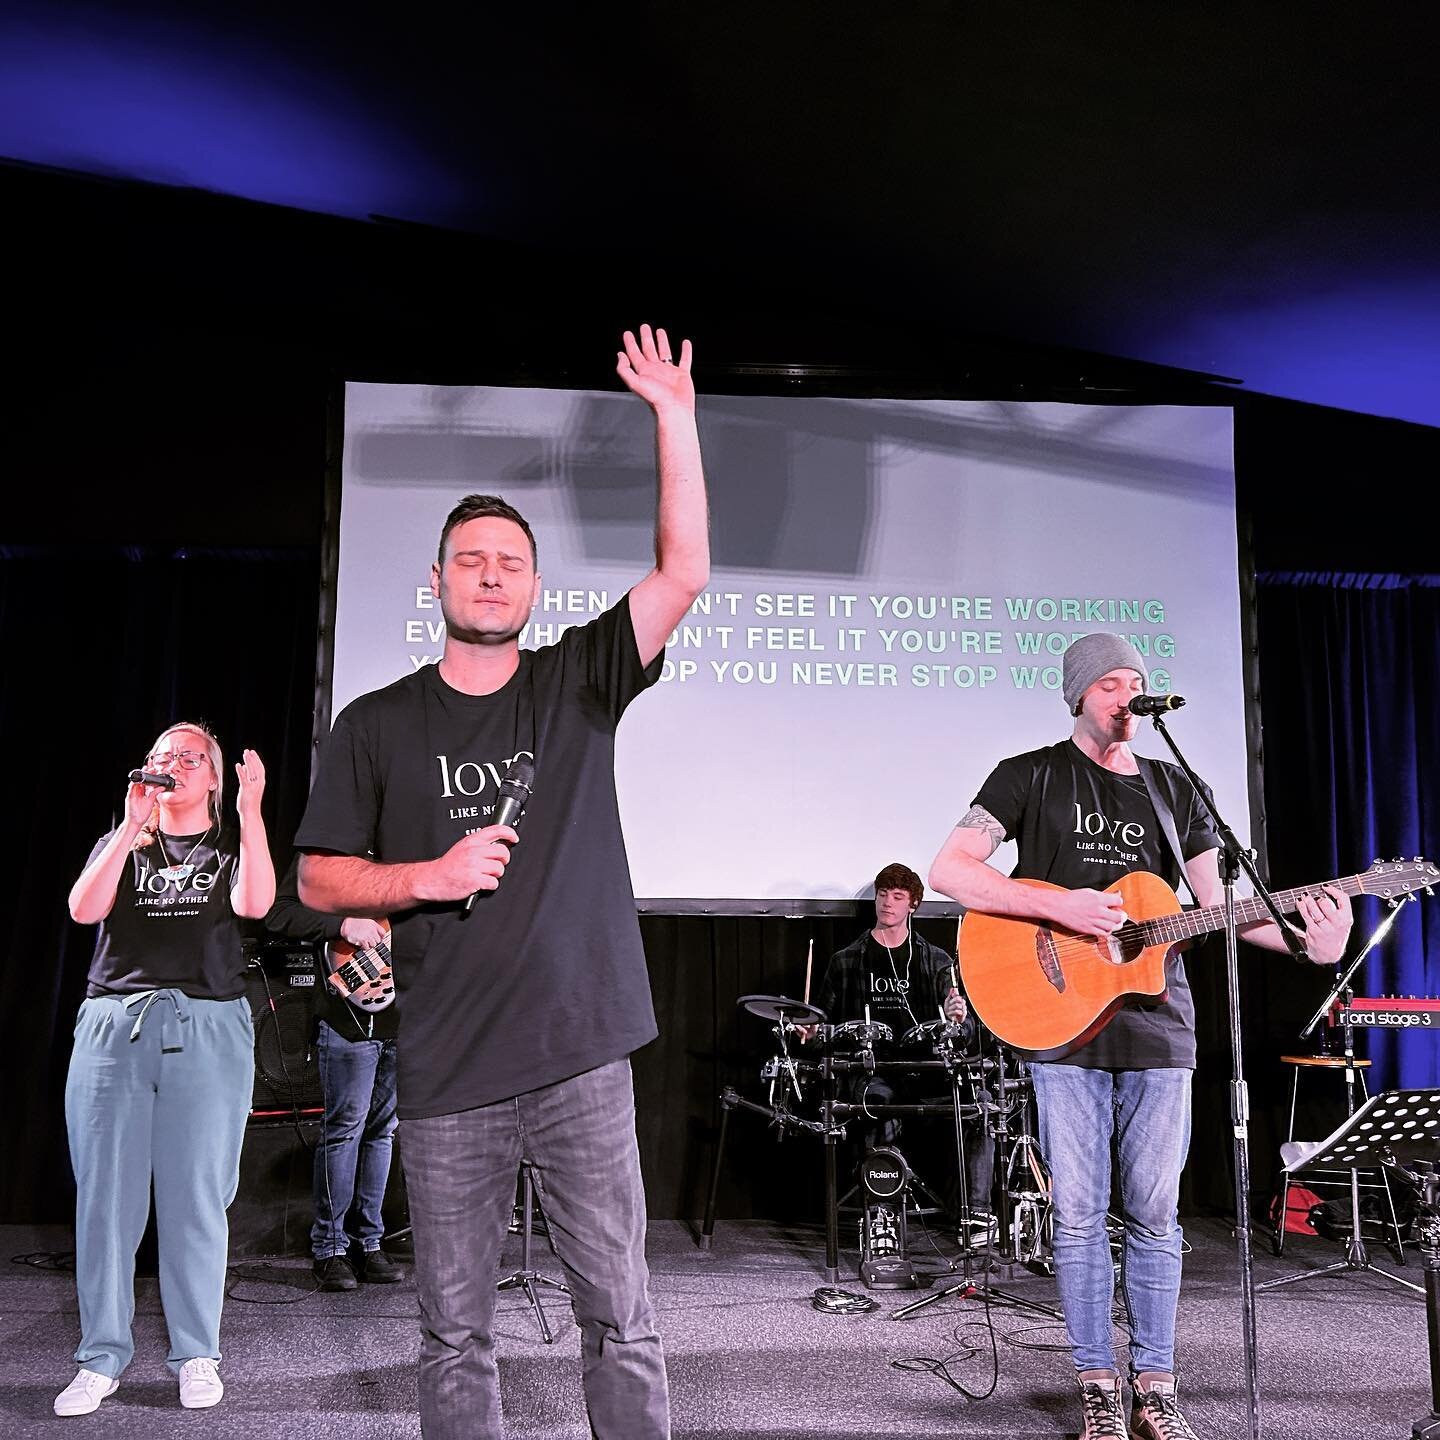 What an incredible Sunday at church! Pastor Andrew's message on 'Love Like No Other' hit home and gave us so many good insights about sharing what God has done in our life! 🙏❤️

Afterwards, our serve teams headed to Tangoio and put that Love into ac